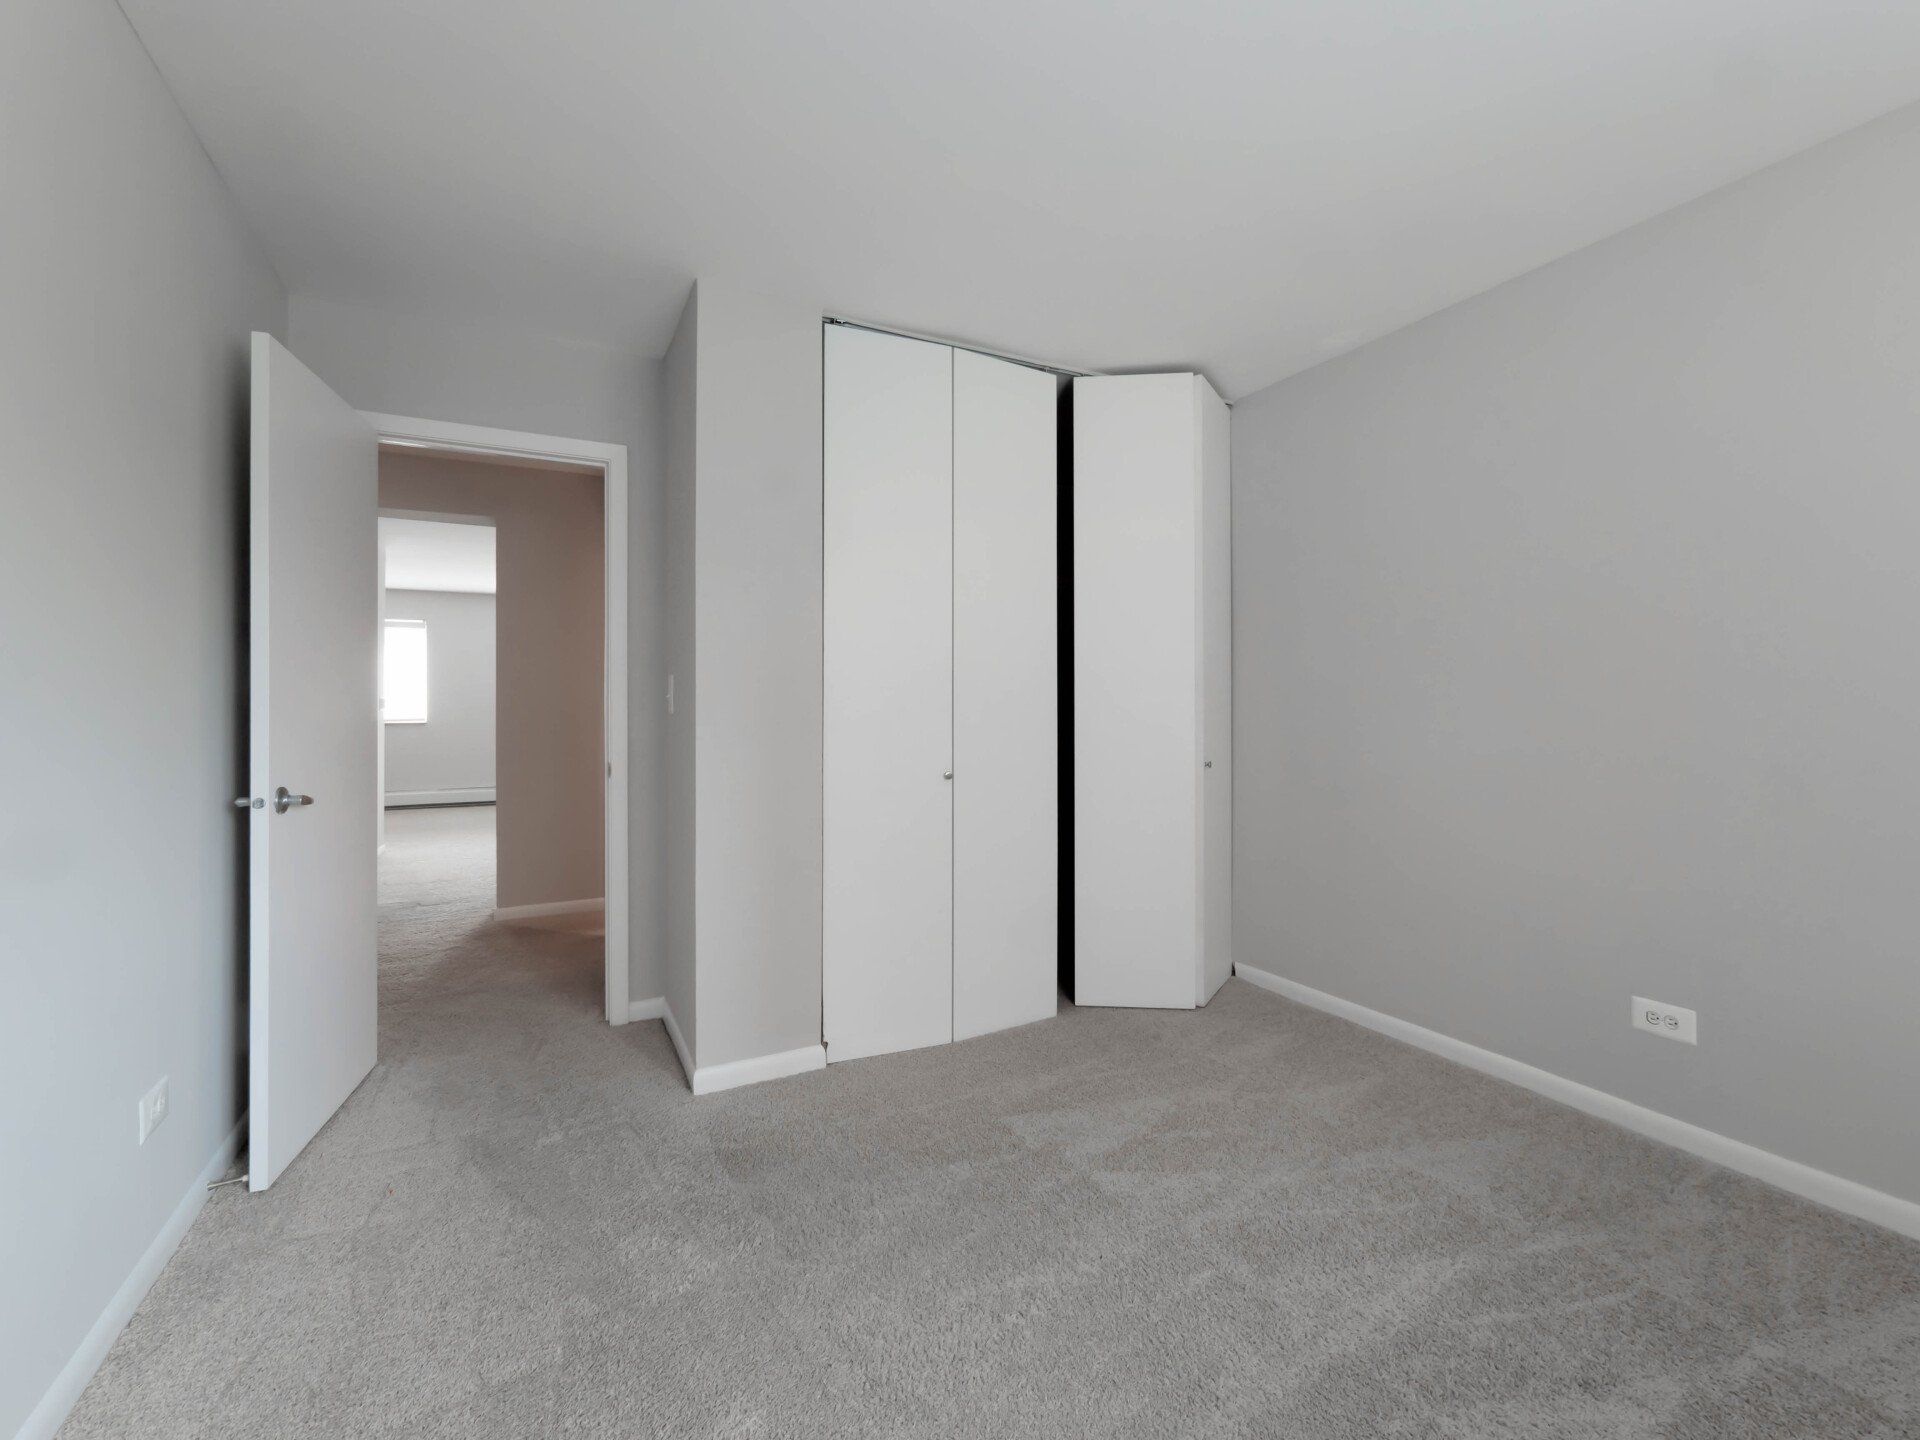 An empty bedroom with a carpeted floor and white walls at Reside on Morse.